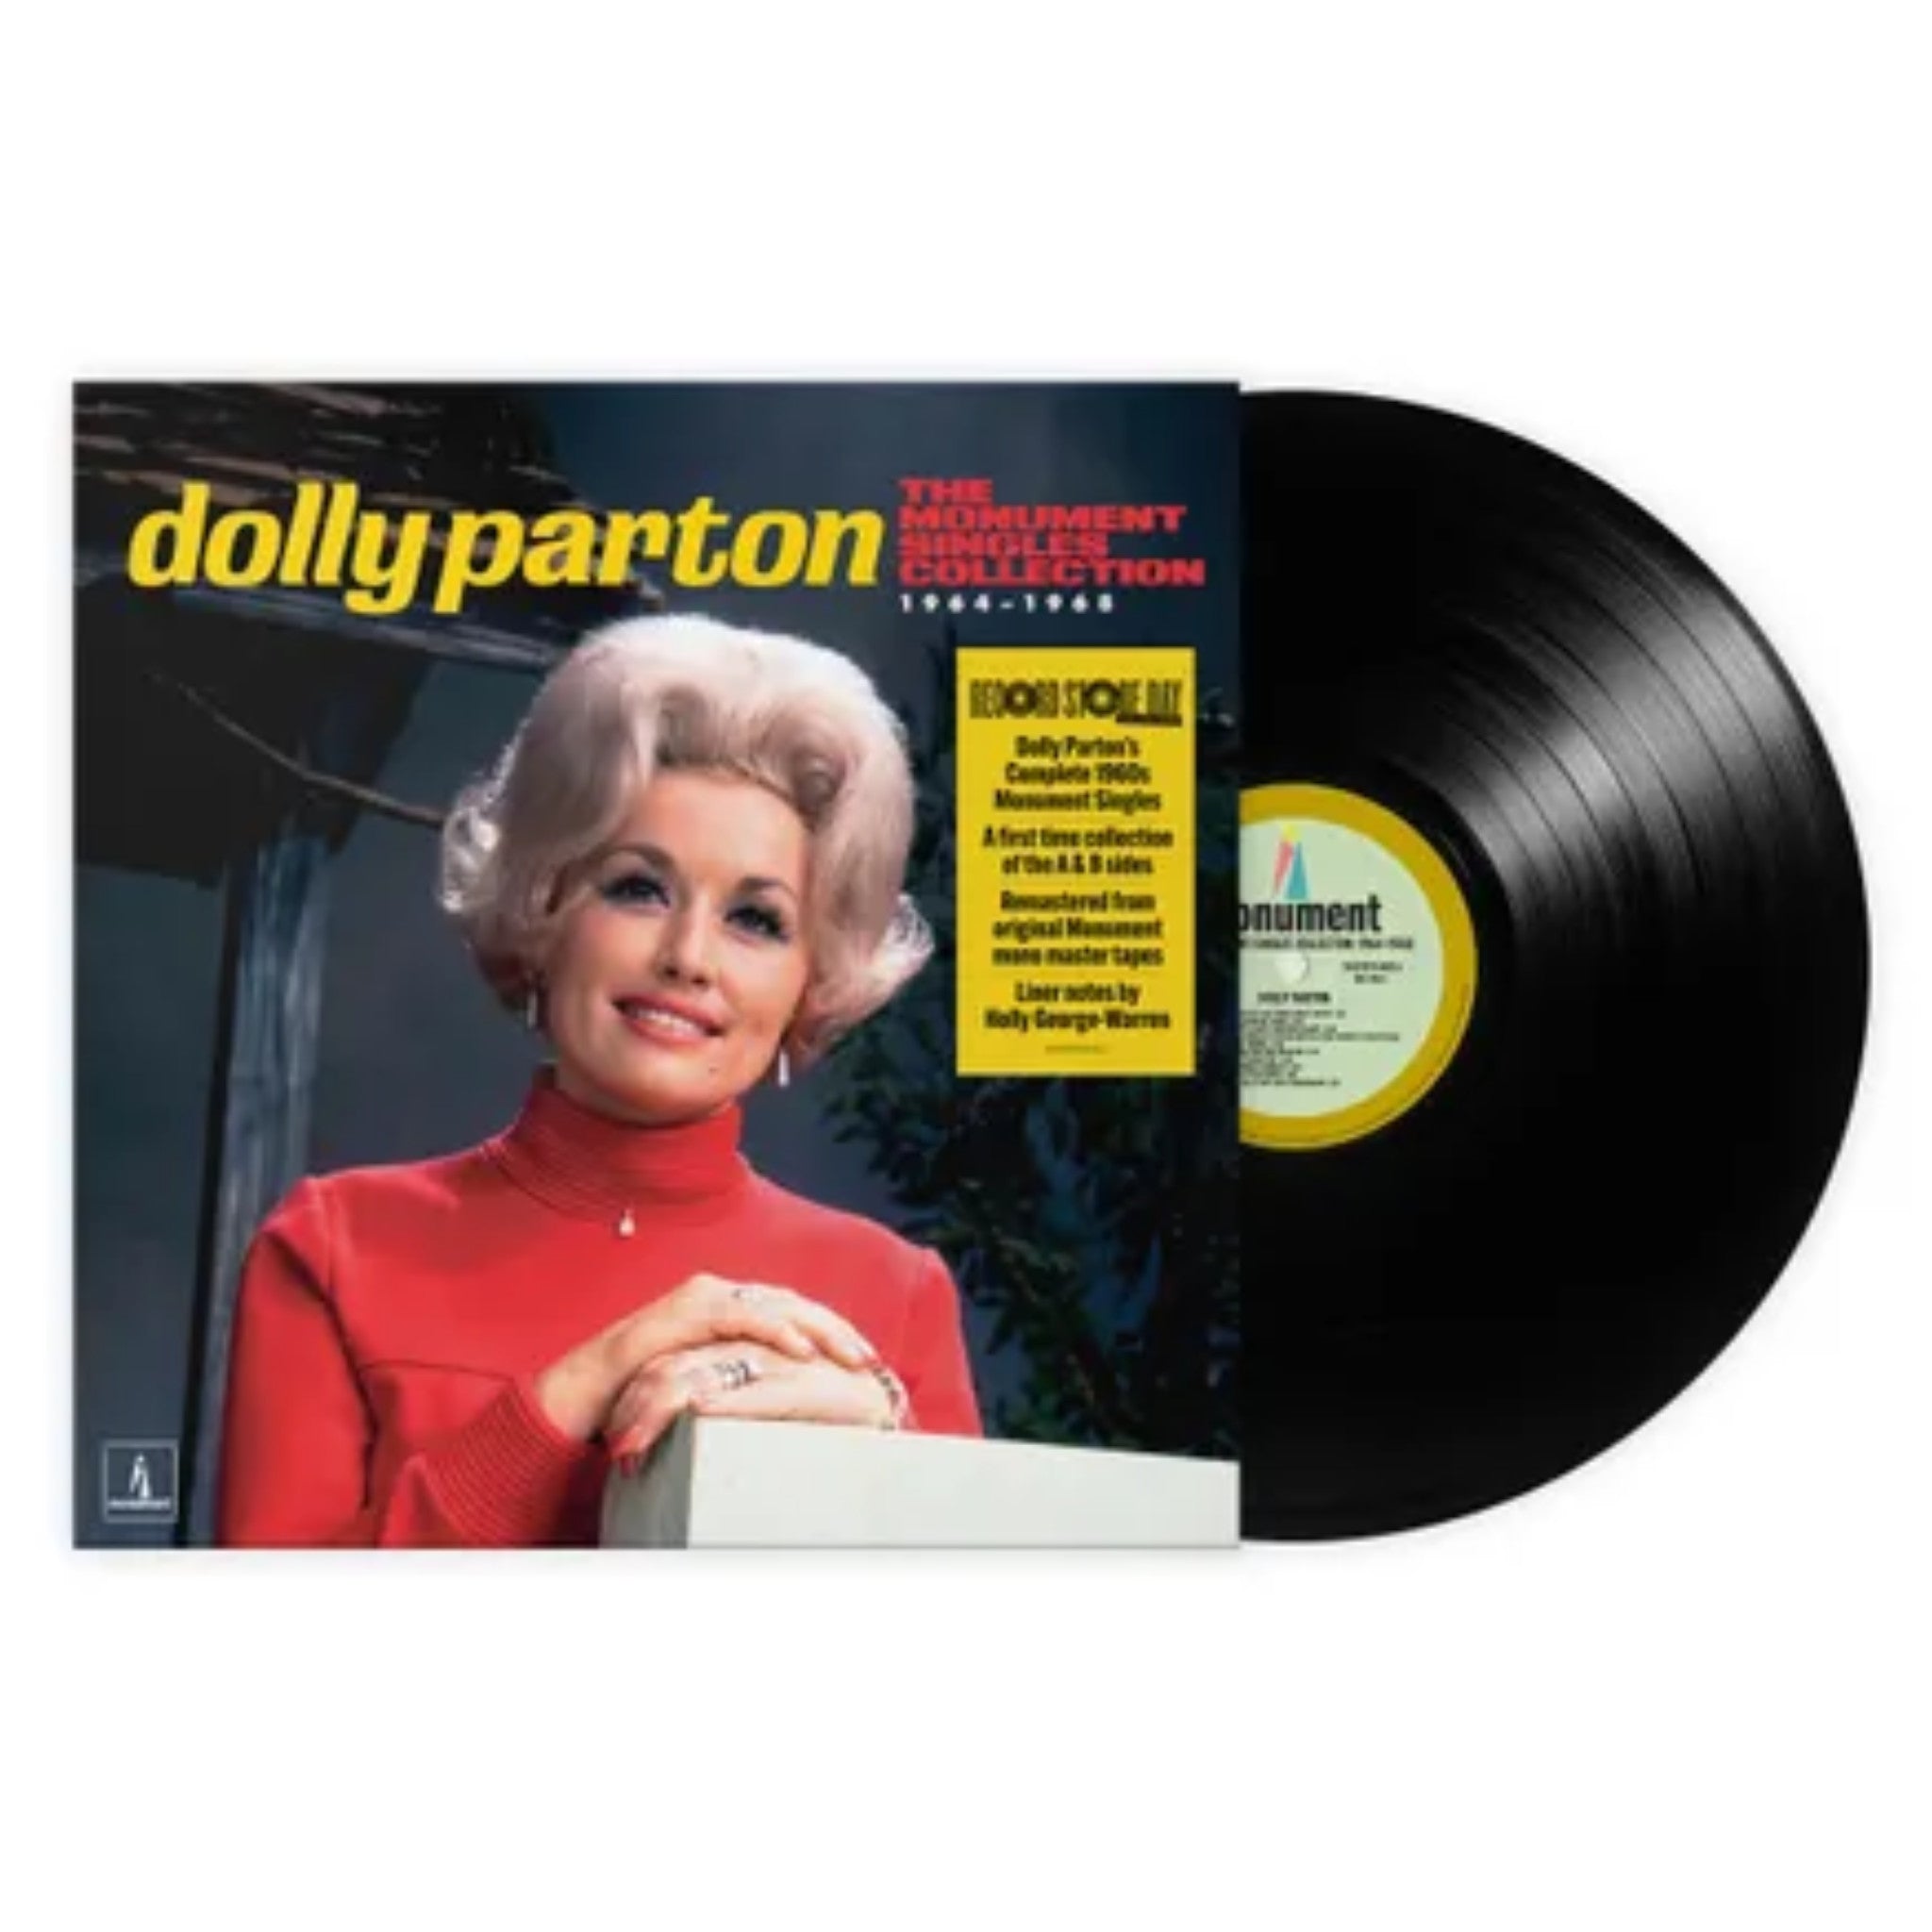 Dolly Parton- The Monument Singles Collection 1964-1968  -RSD23 (DAMAGED) - Darkside Records